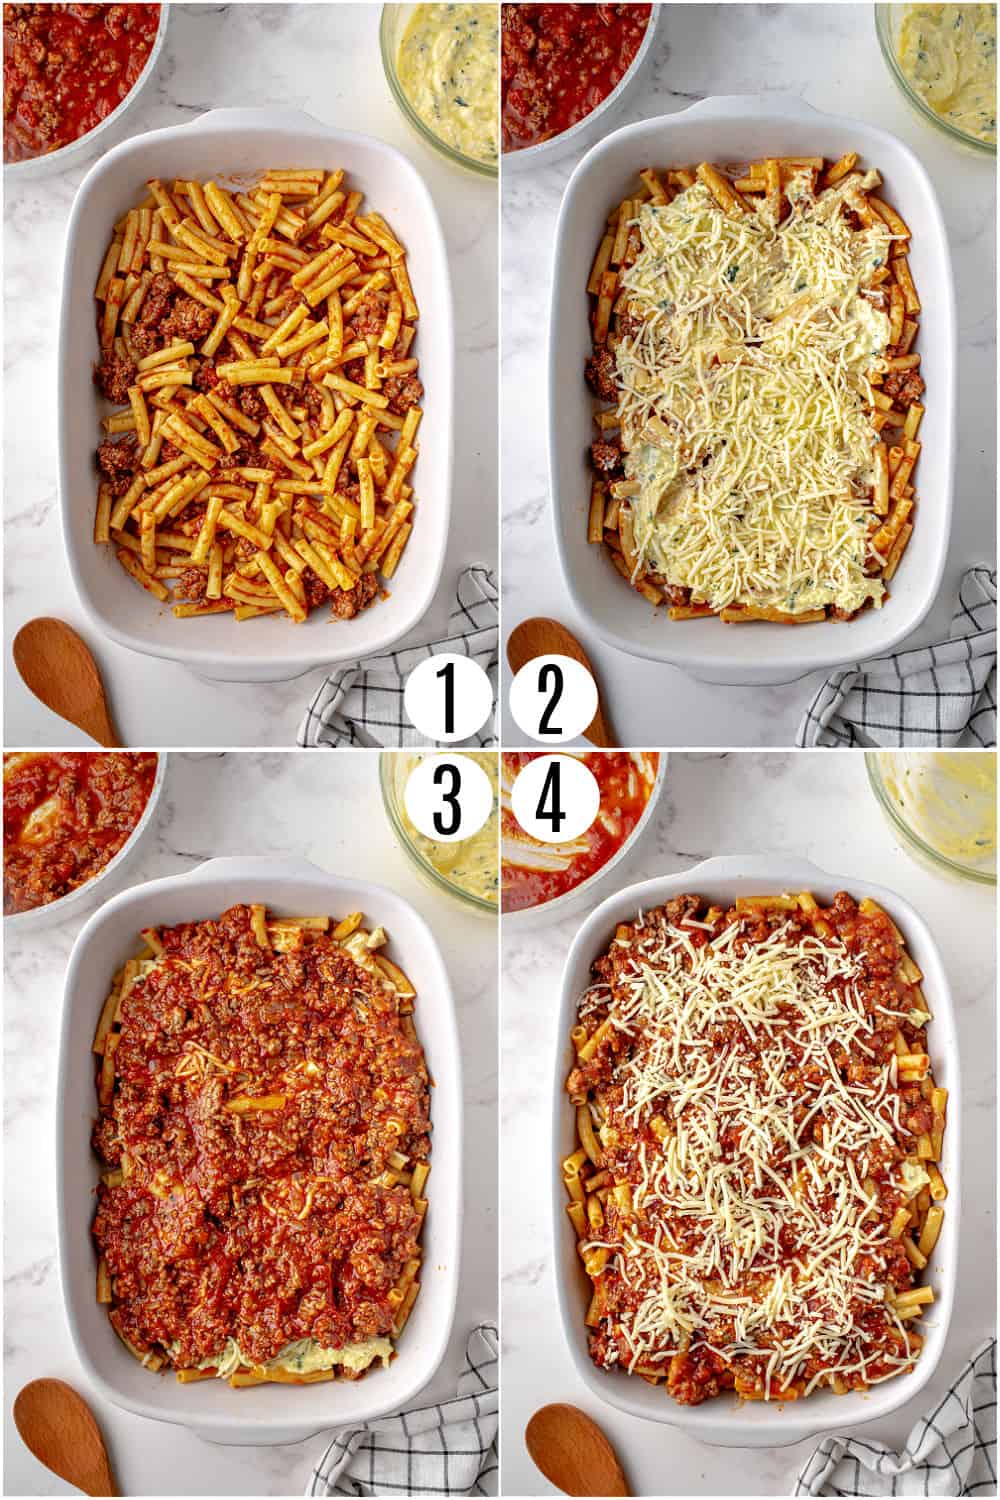 Step by step photos showing how to assemble baked ziti.